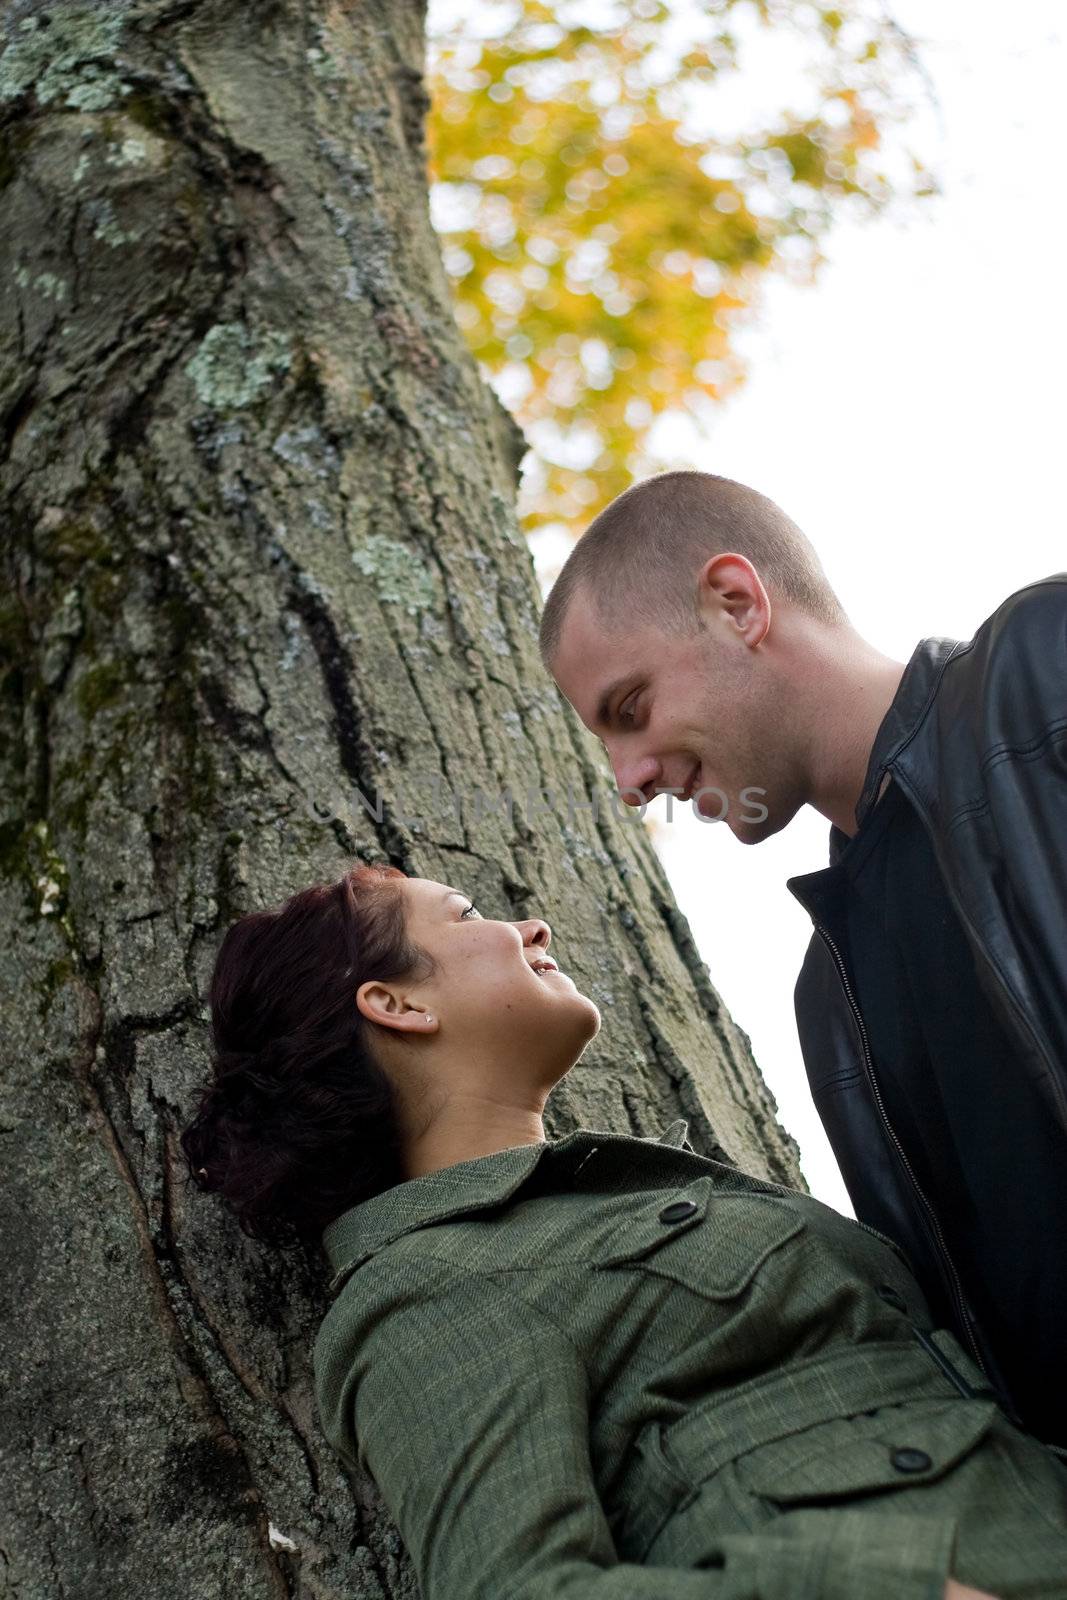 A young happy couple together outdoors by a tree on a fall day.